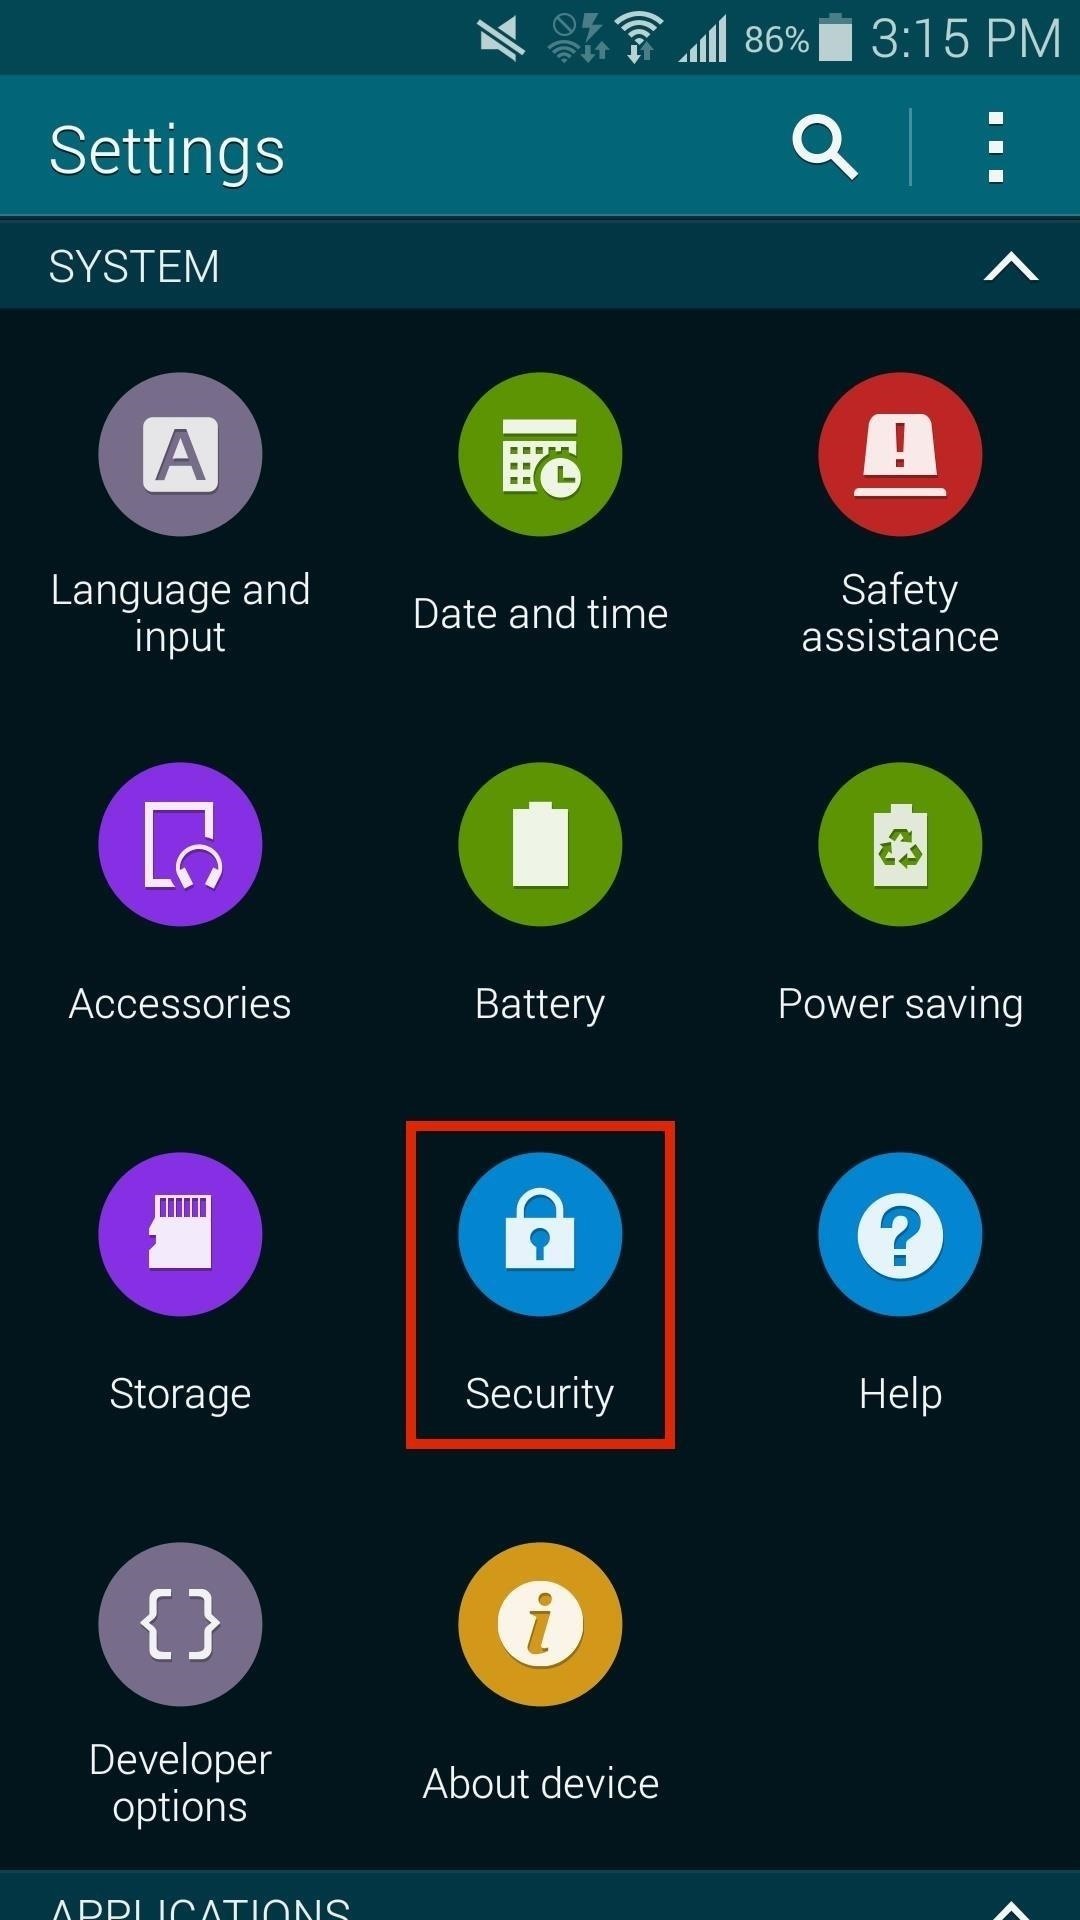 How to Install a Custom Recovery on Your Bootloader-Locked Galaxy S5 (AT&T or Verizon)